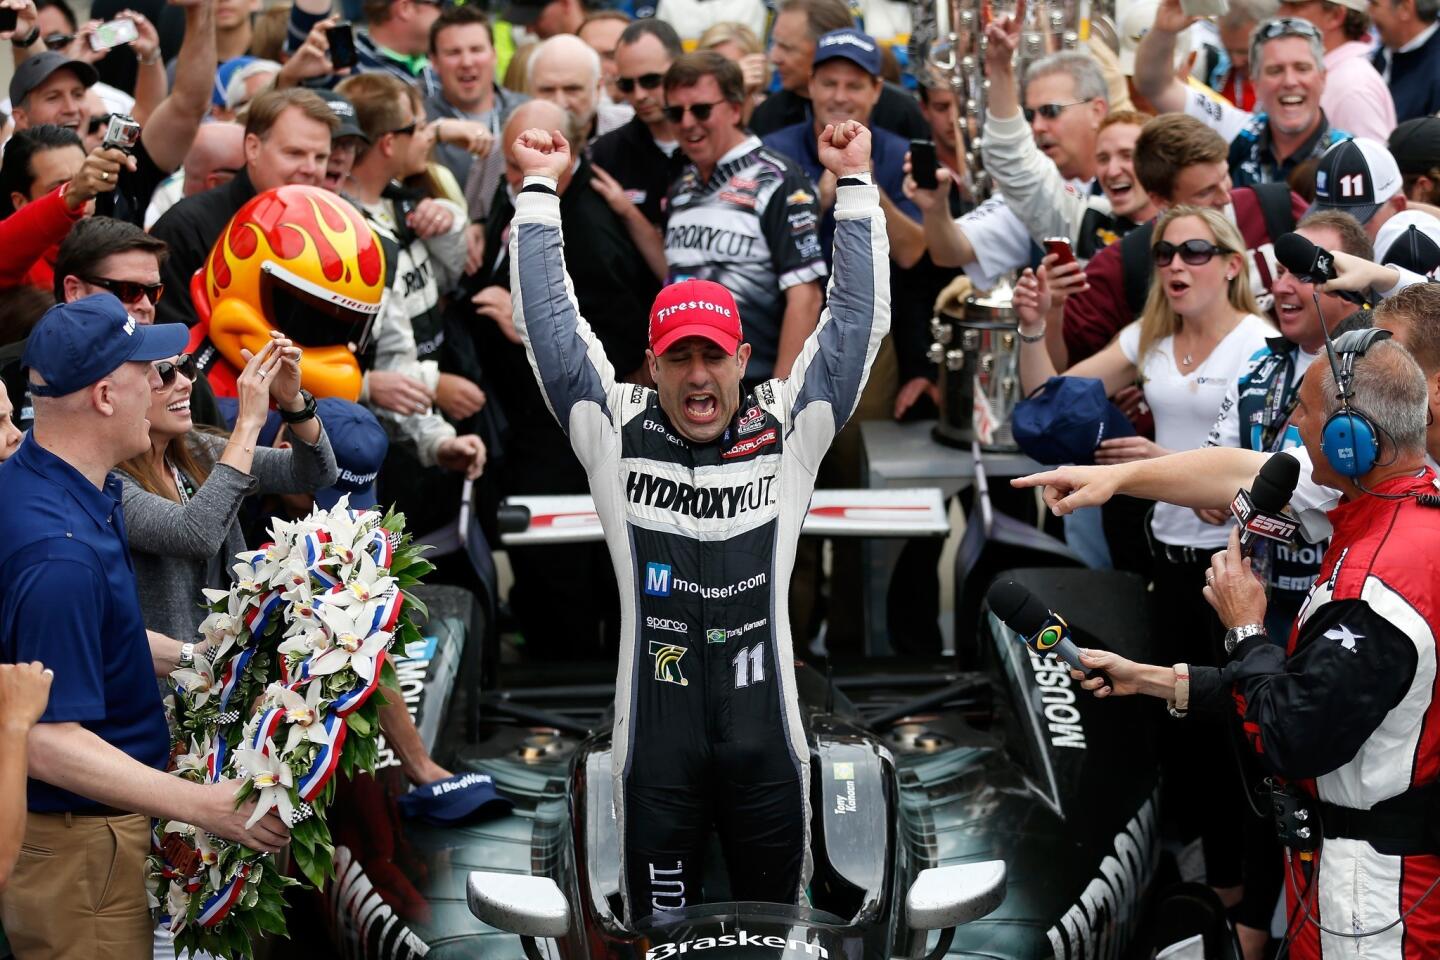 Tony Kanaan celebrates in Victory Lane on Sunday after winning his first Indianapolis 500 on his 12th attempt in the historic race.